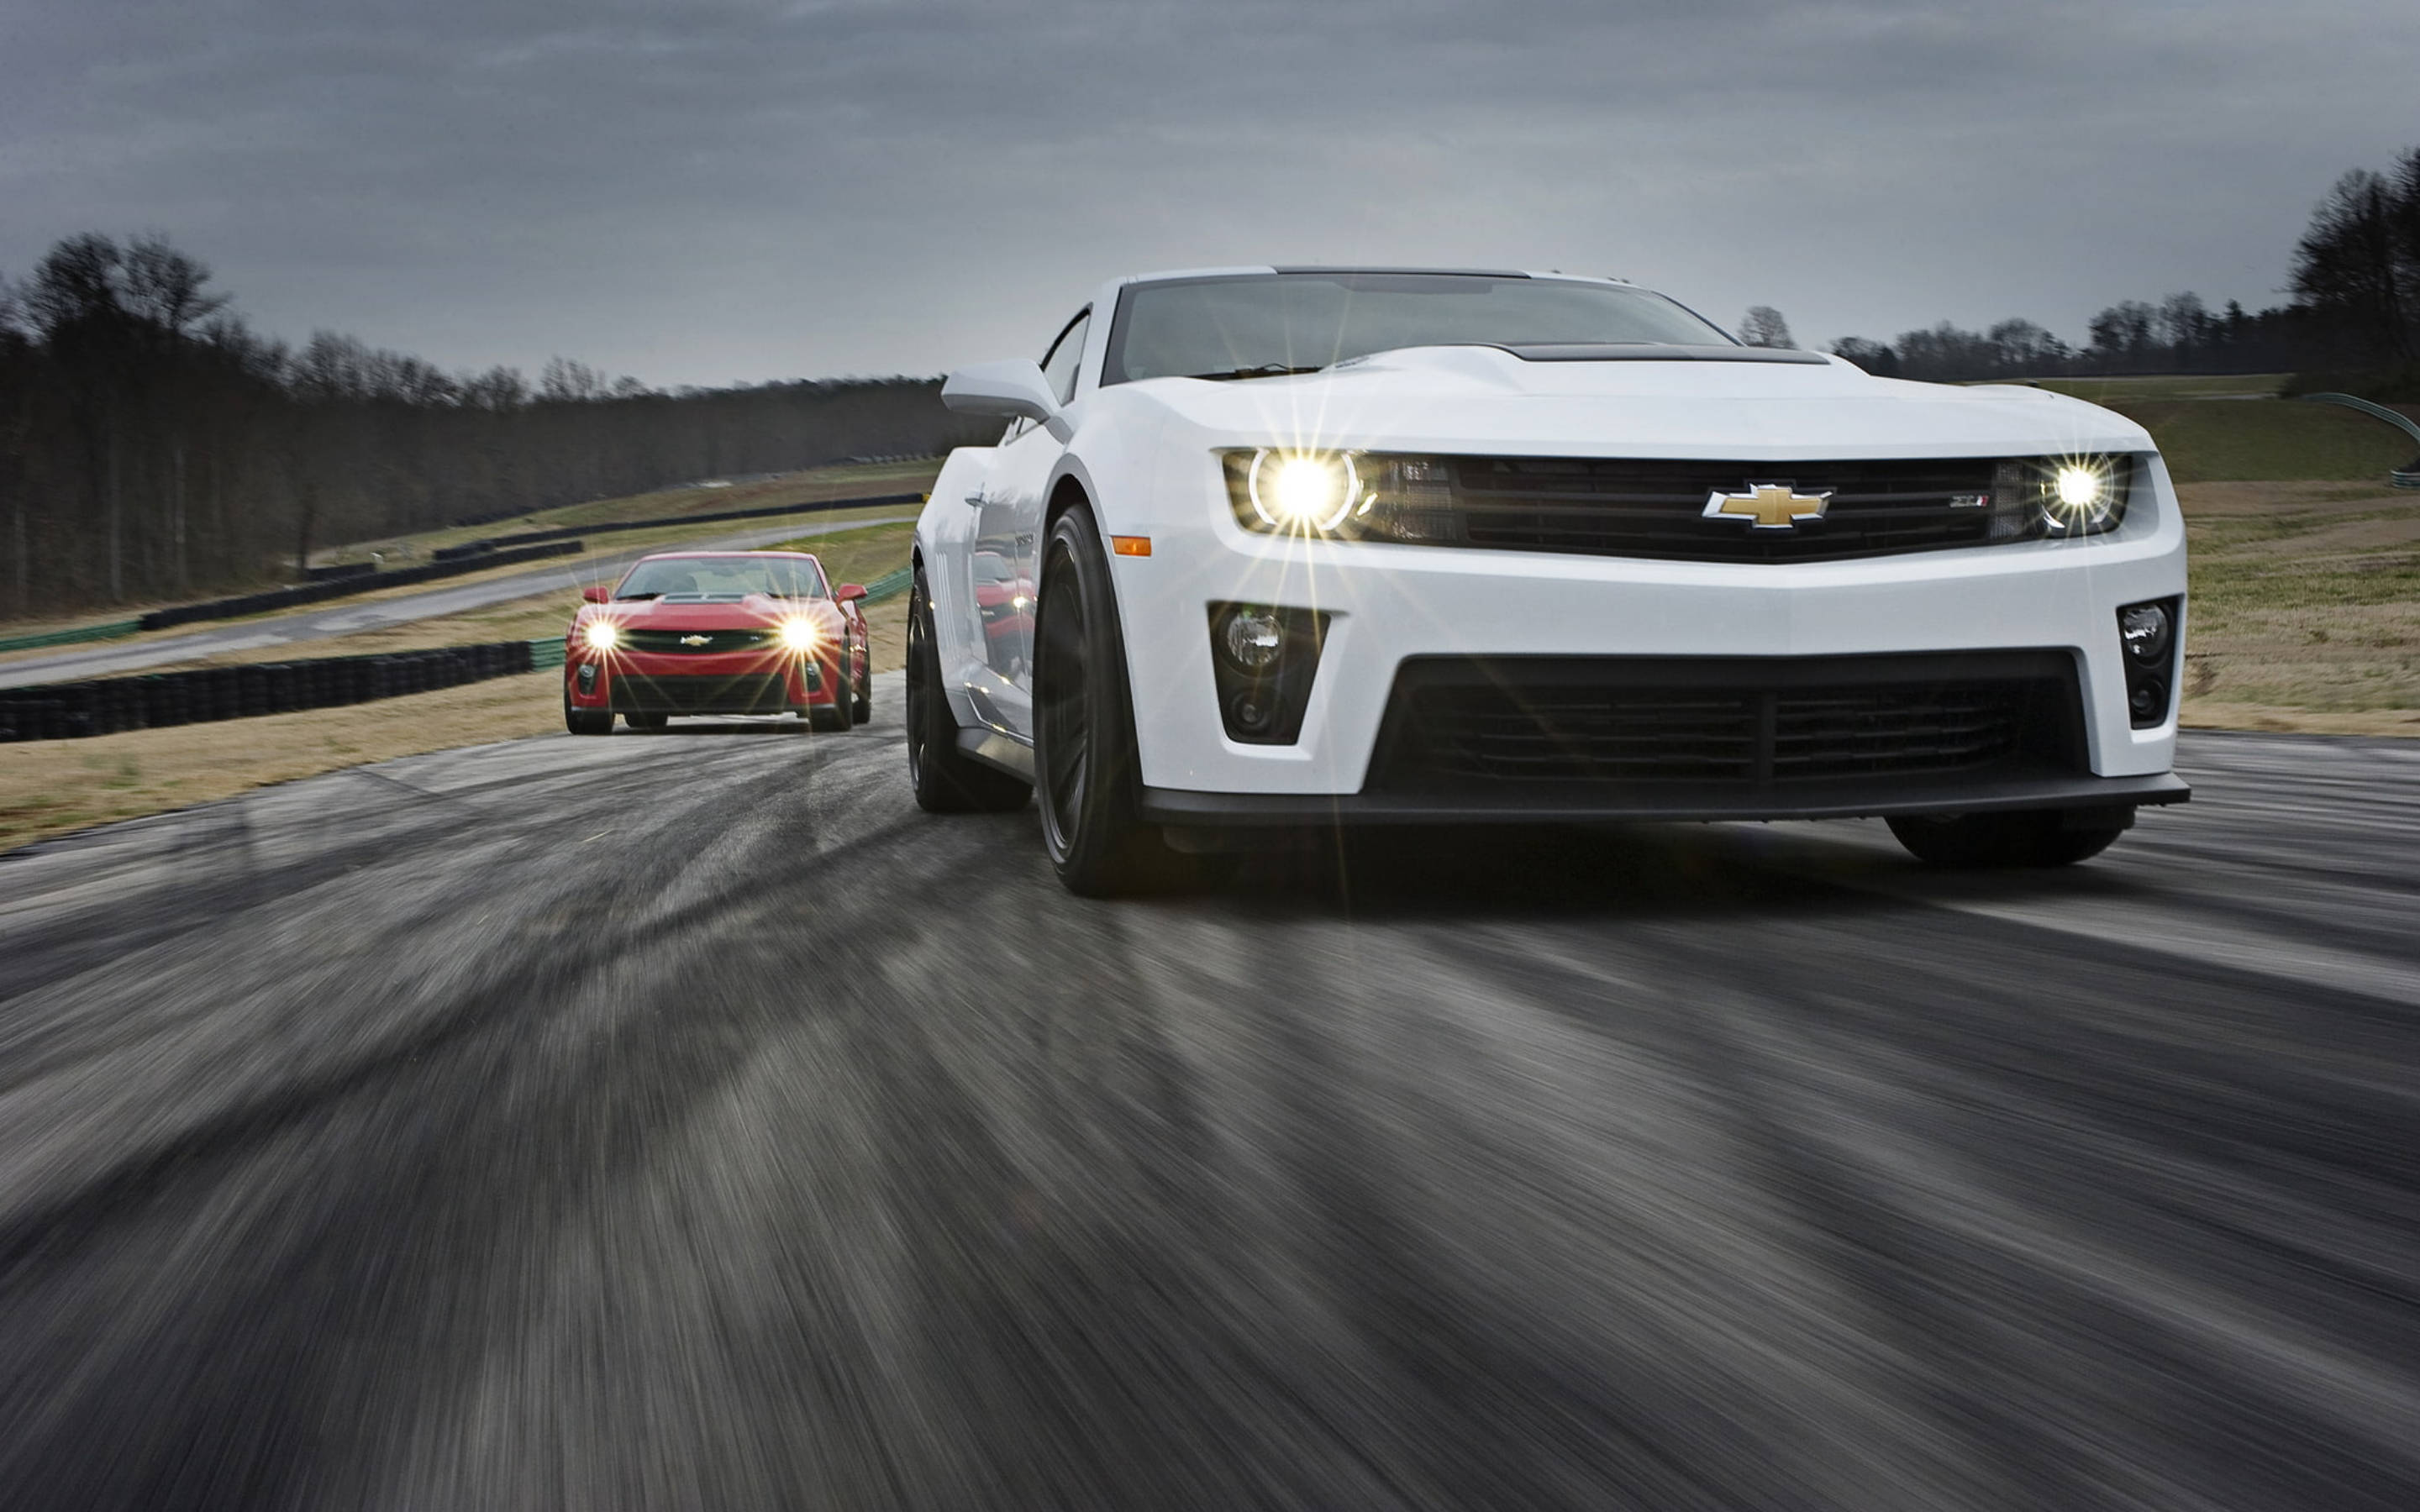 Caption: Striking Speed - A Chevrolet Camaro Muscle Car in its Racing Glory Wallpaper